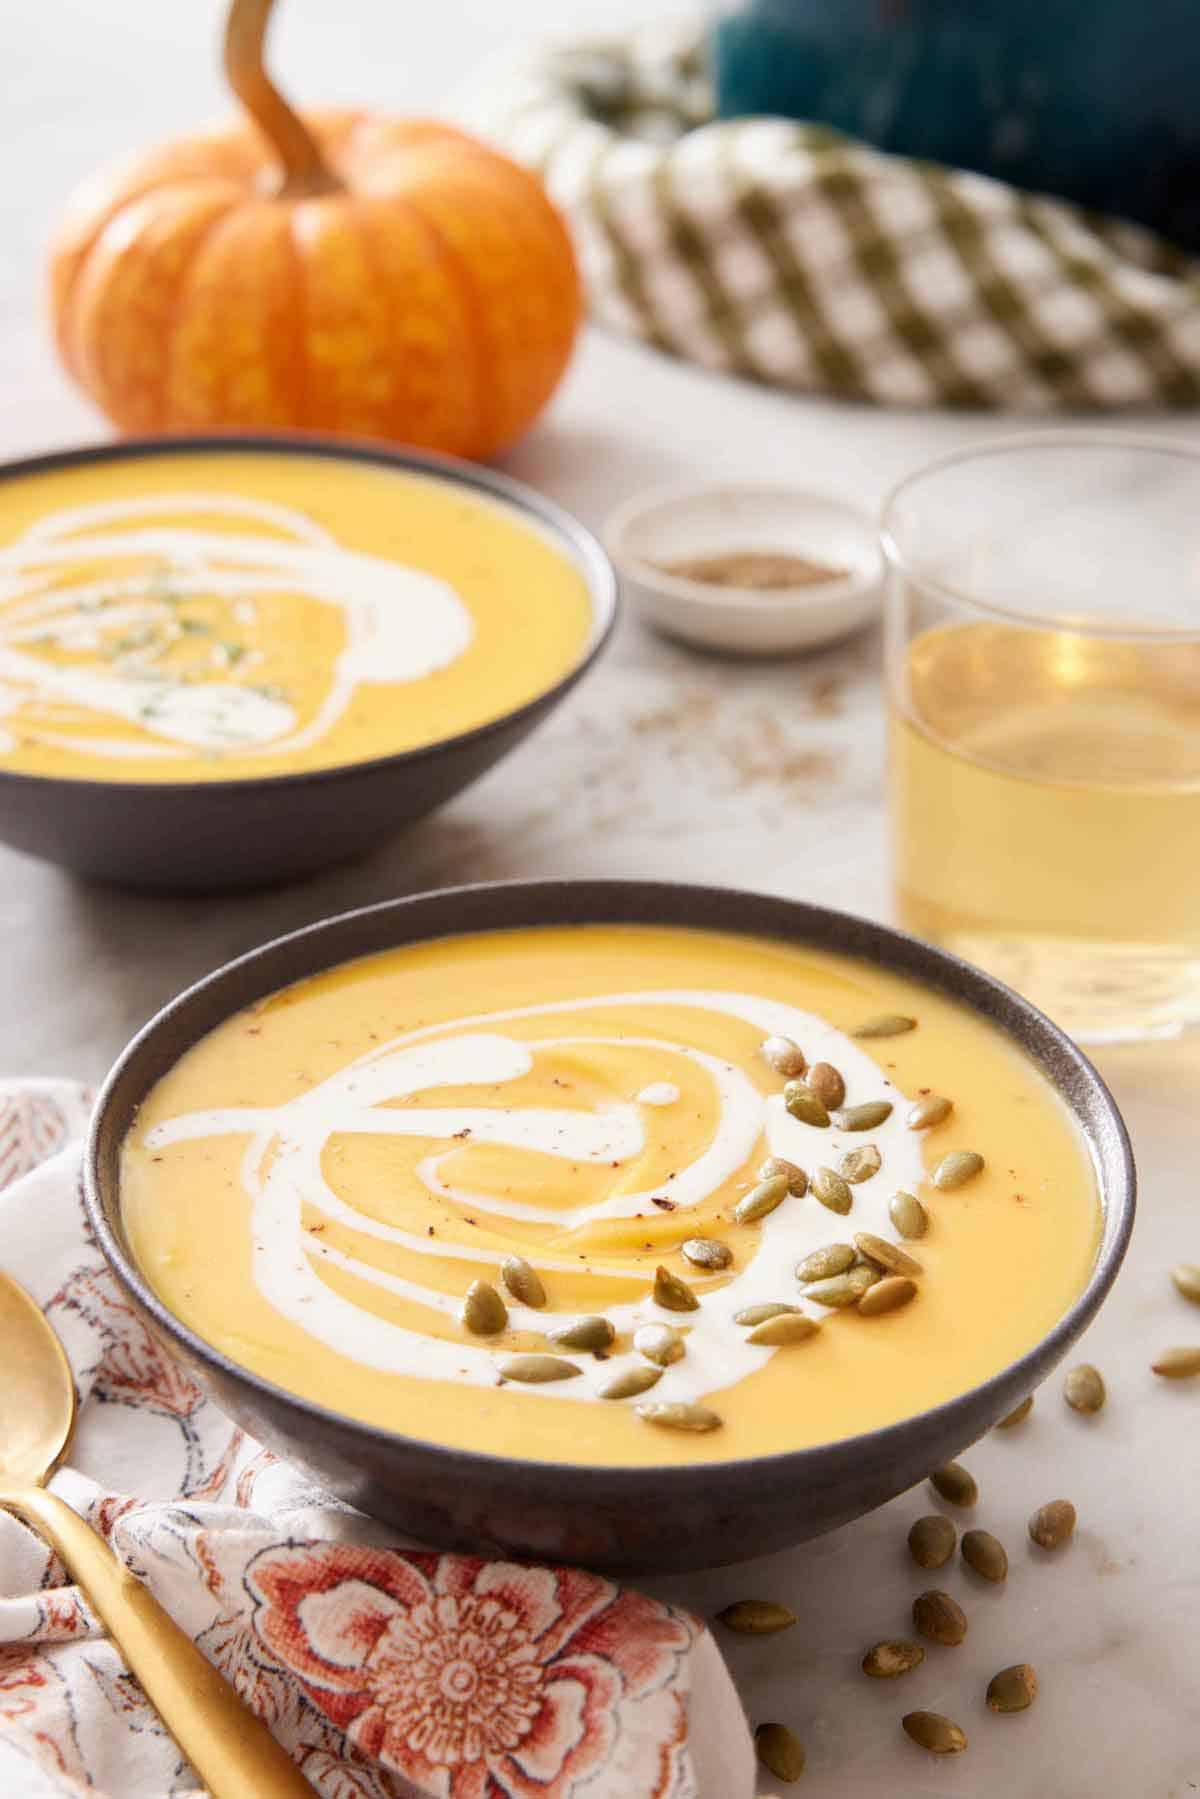 Two bowls of pumpkin soup with a drizzle of cream and pumpkin seeds as a garnish and a glass of wine in the background along with a pumpkin.